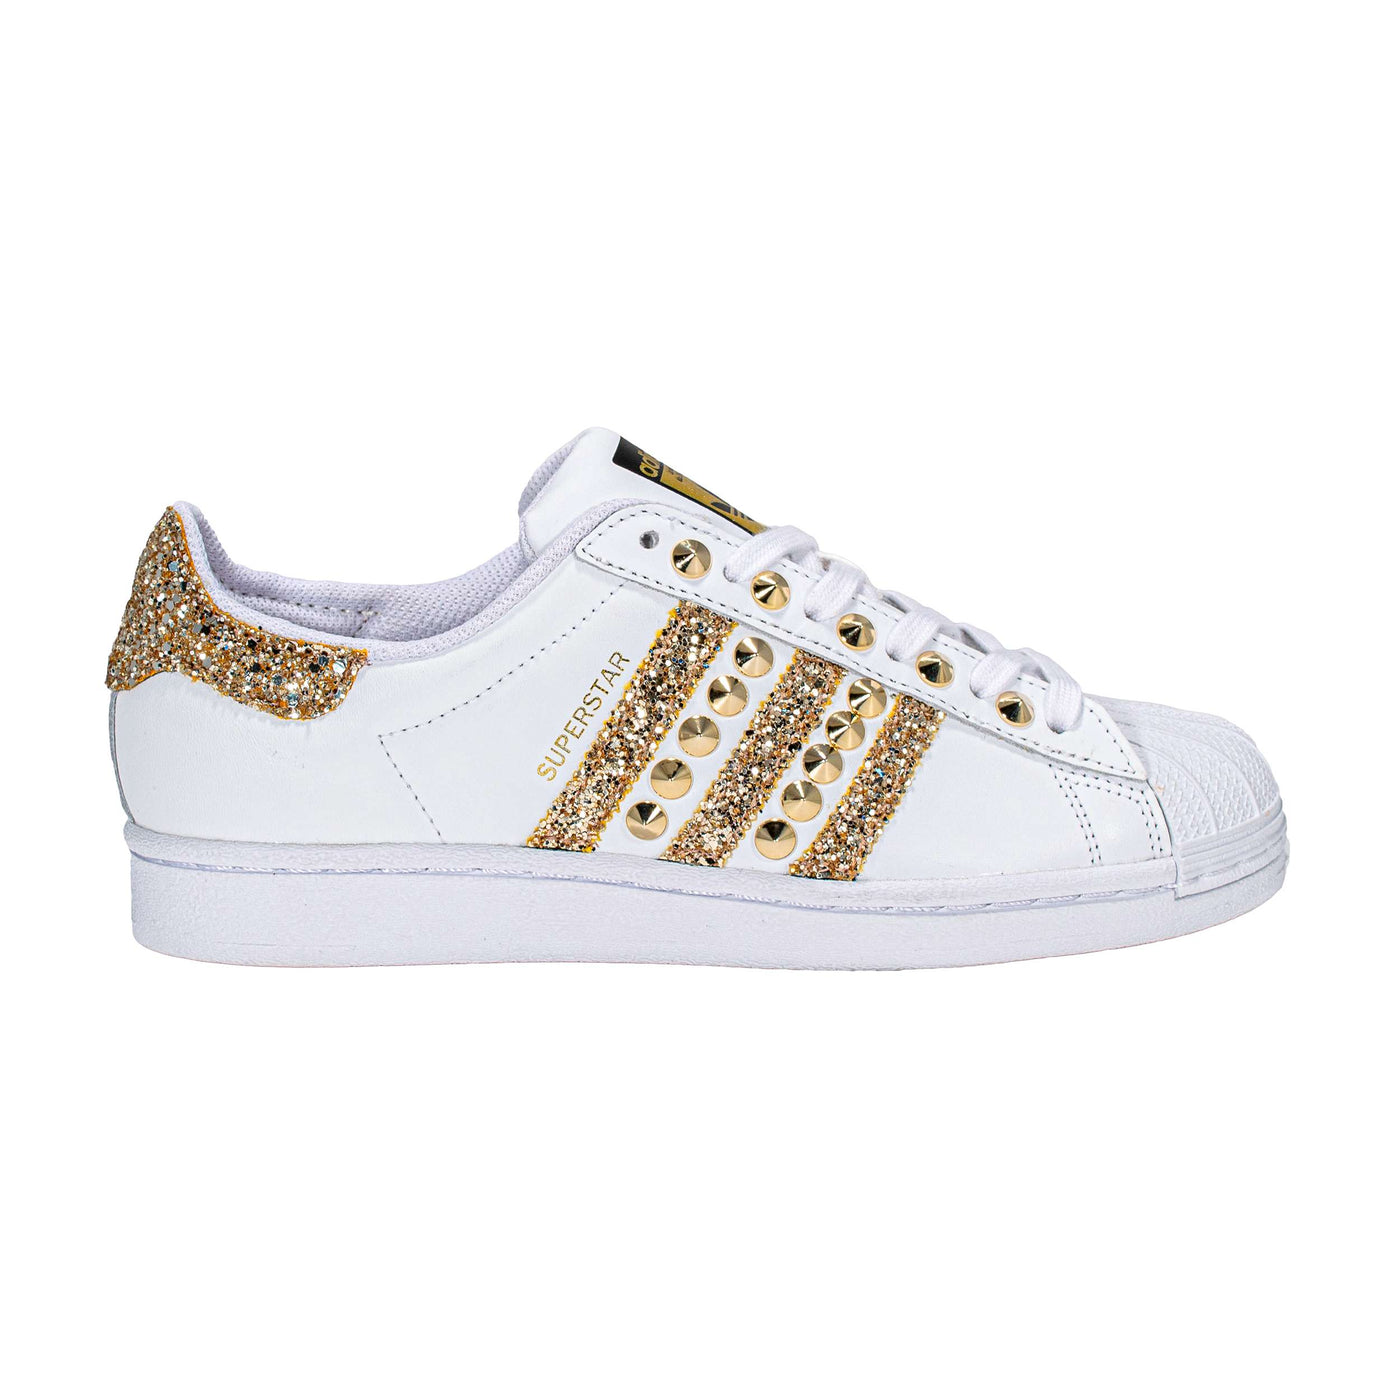 ADIDAS SUPERSTAR PERSONALIZZATE PAUL